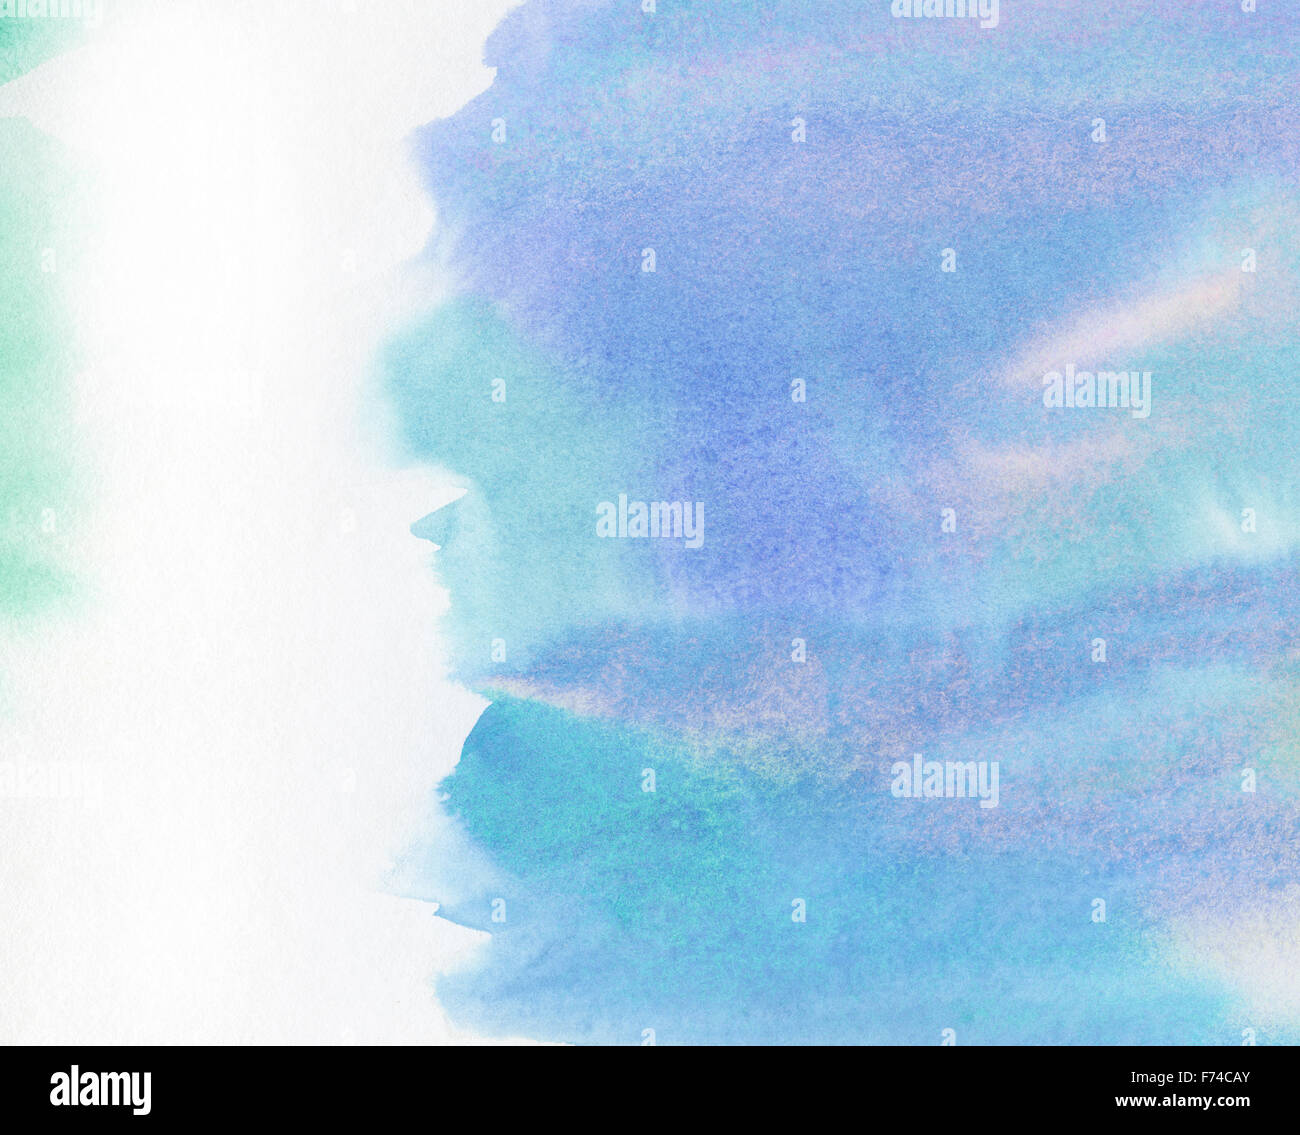 Abstract painted watercolor water, sky or cloud with copy space Stock Photo